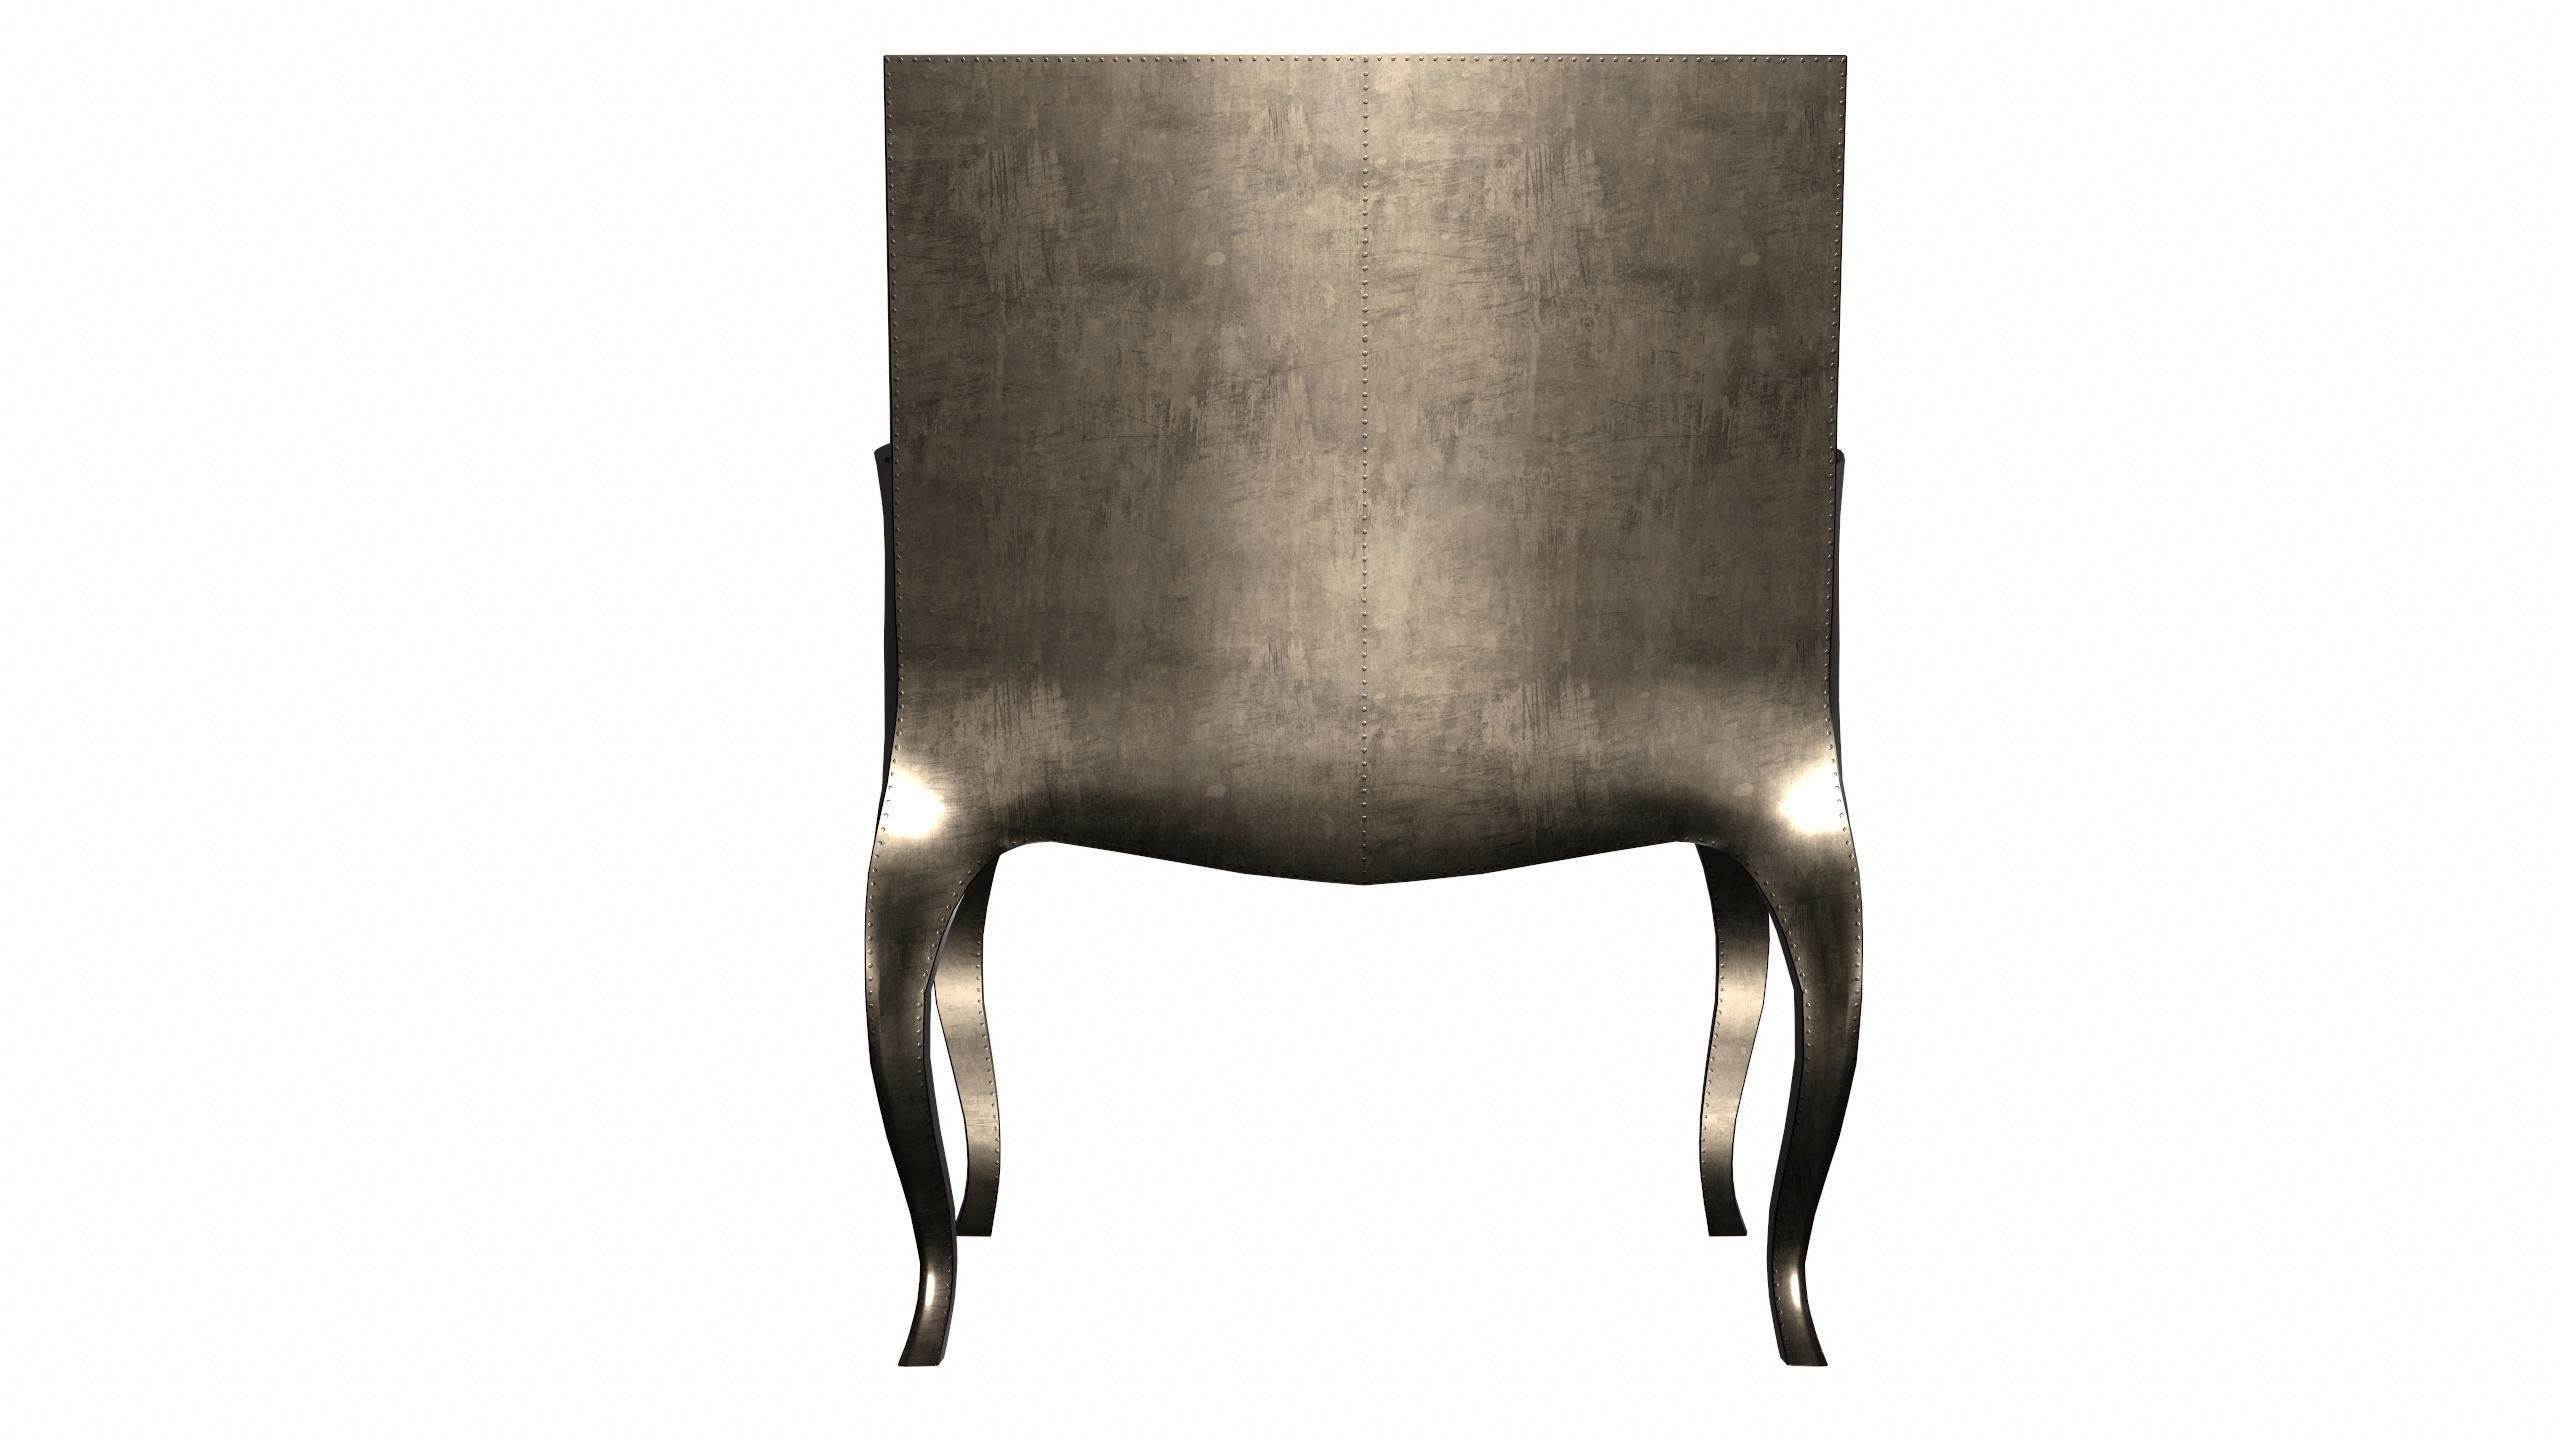 Hand-Carved Art Deco Accent Chair Smooth Antique Bronze by Paul Mathieu for S. Odegard For Sale